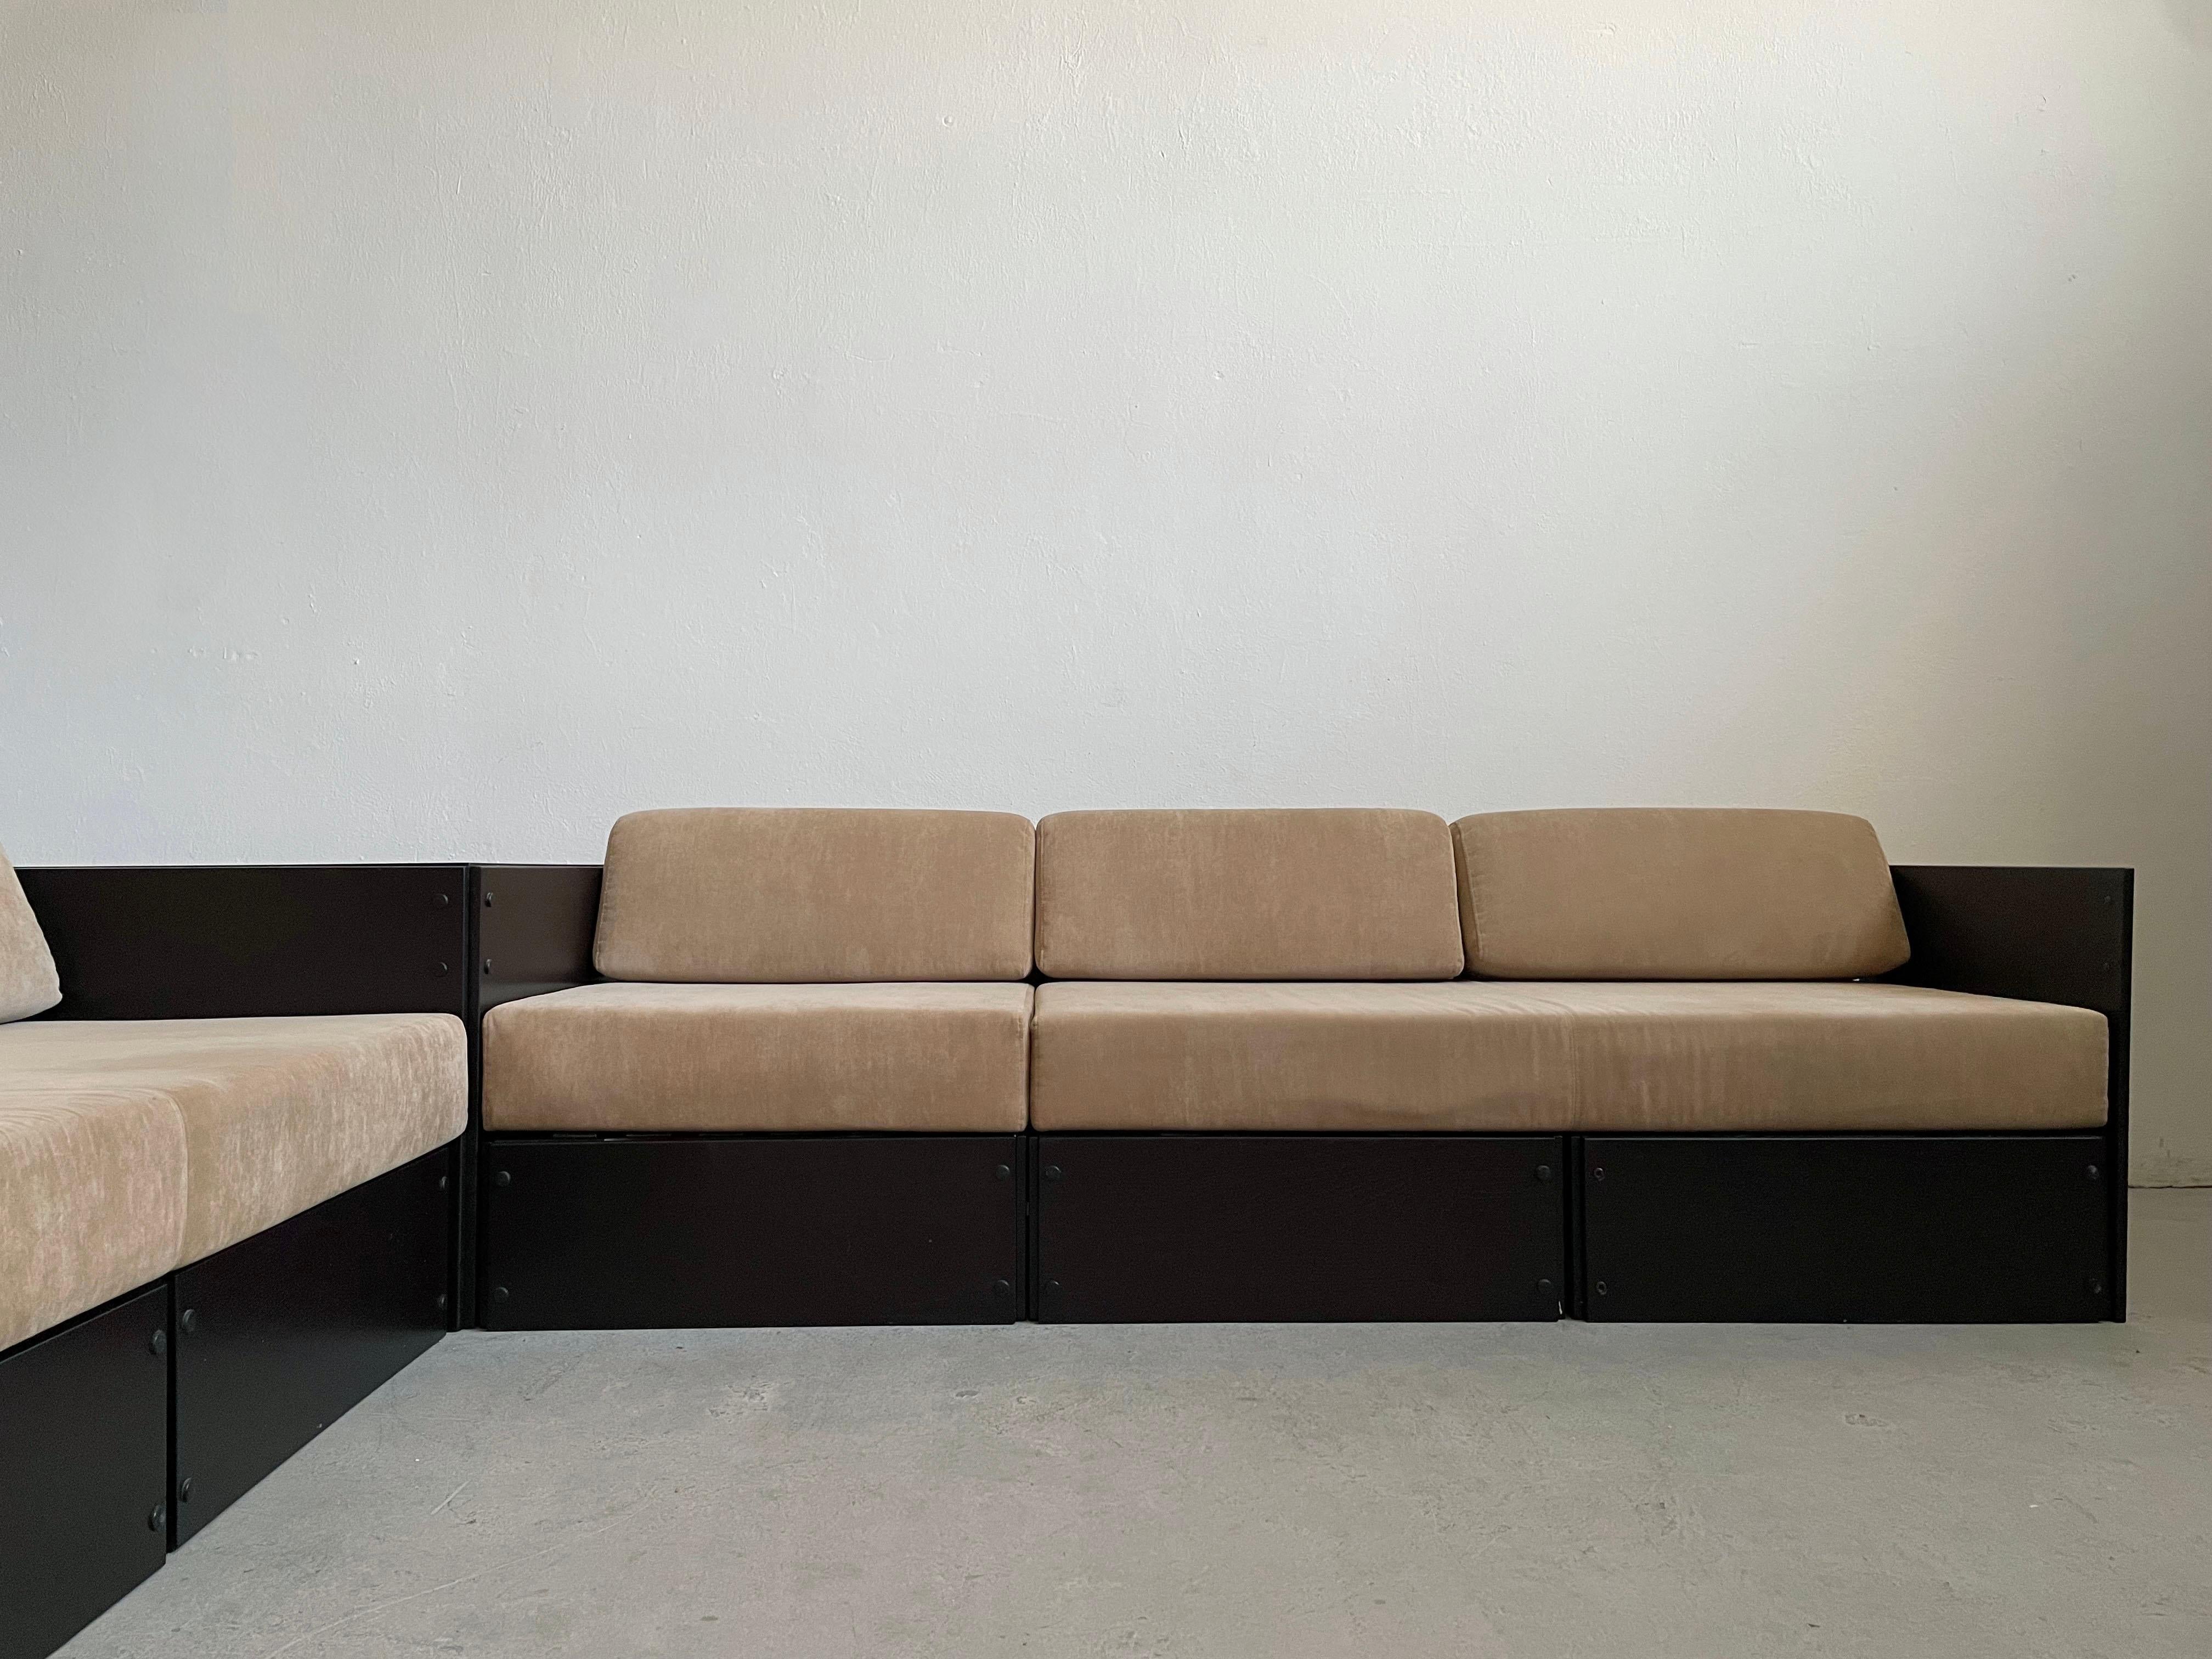 Late 20th Century Mid-Century Modern Modular Sofa by Rolf Heide for ICF, 1970s For Sale